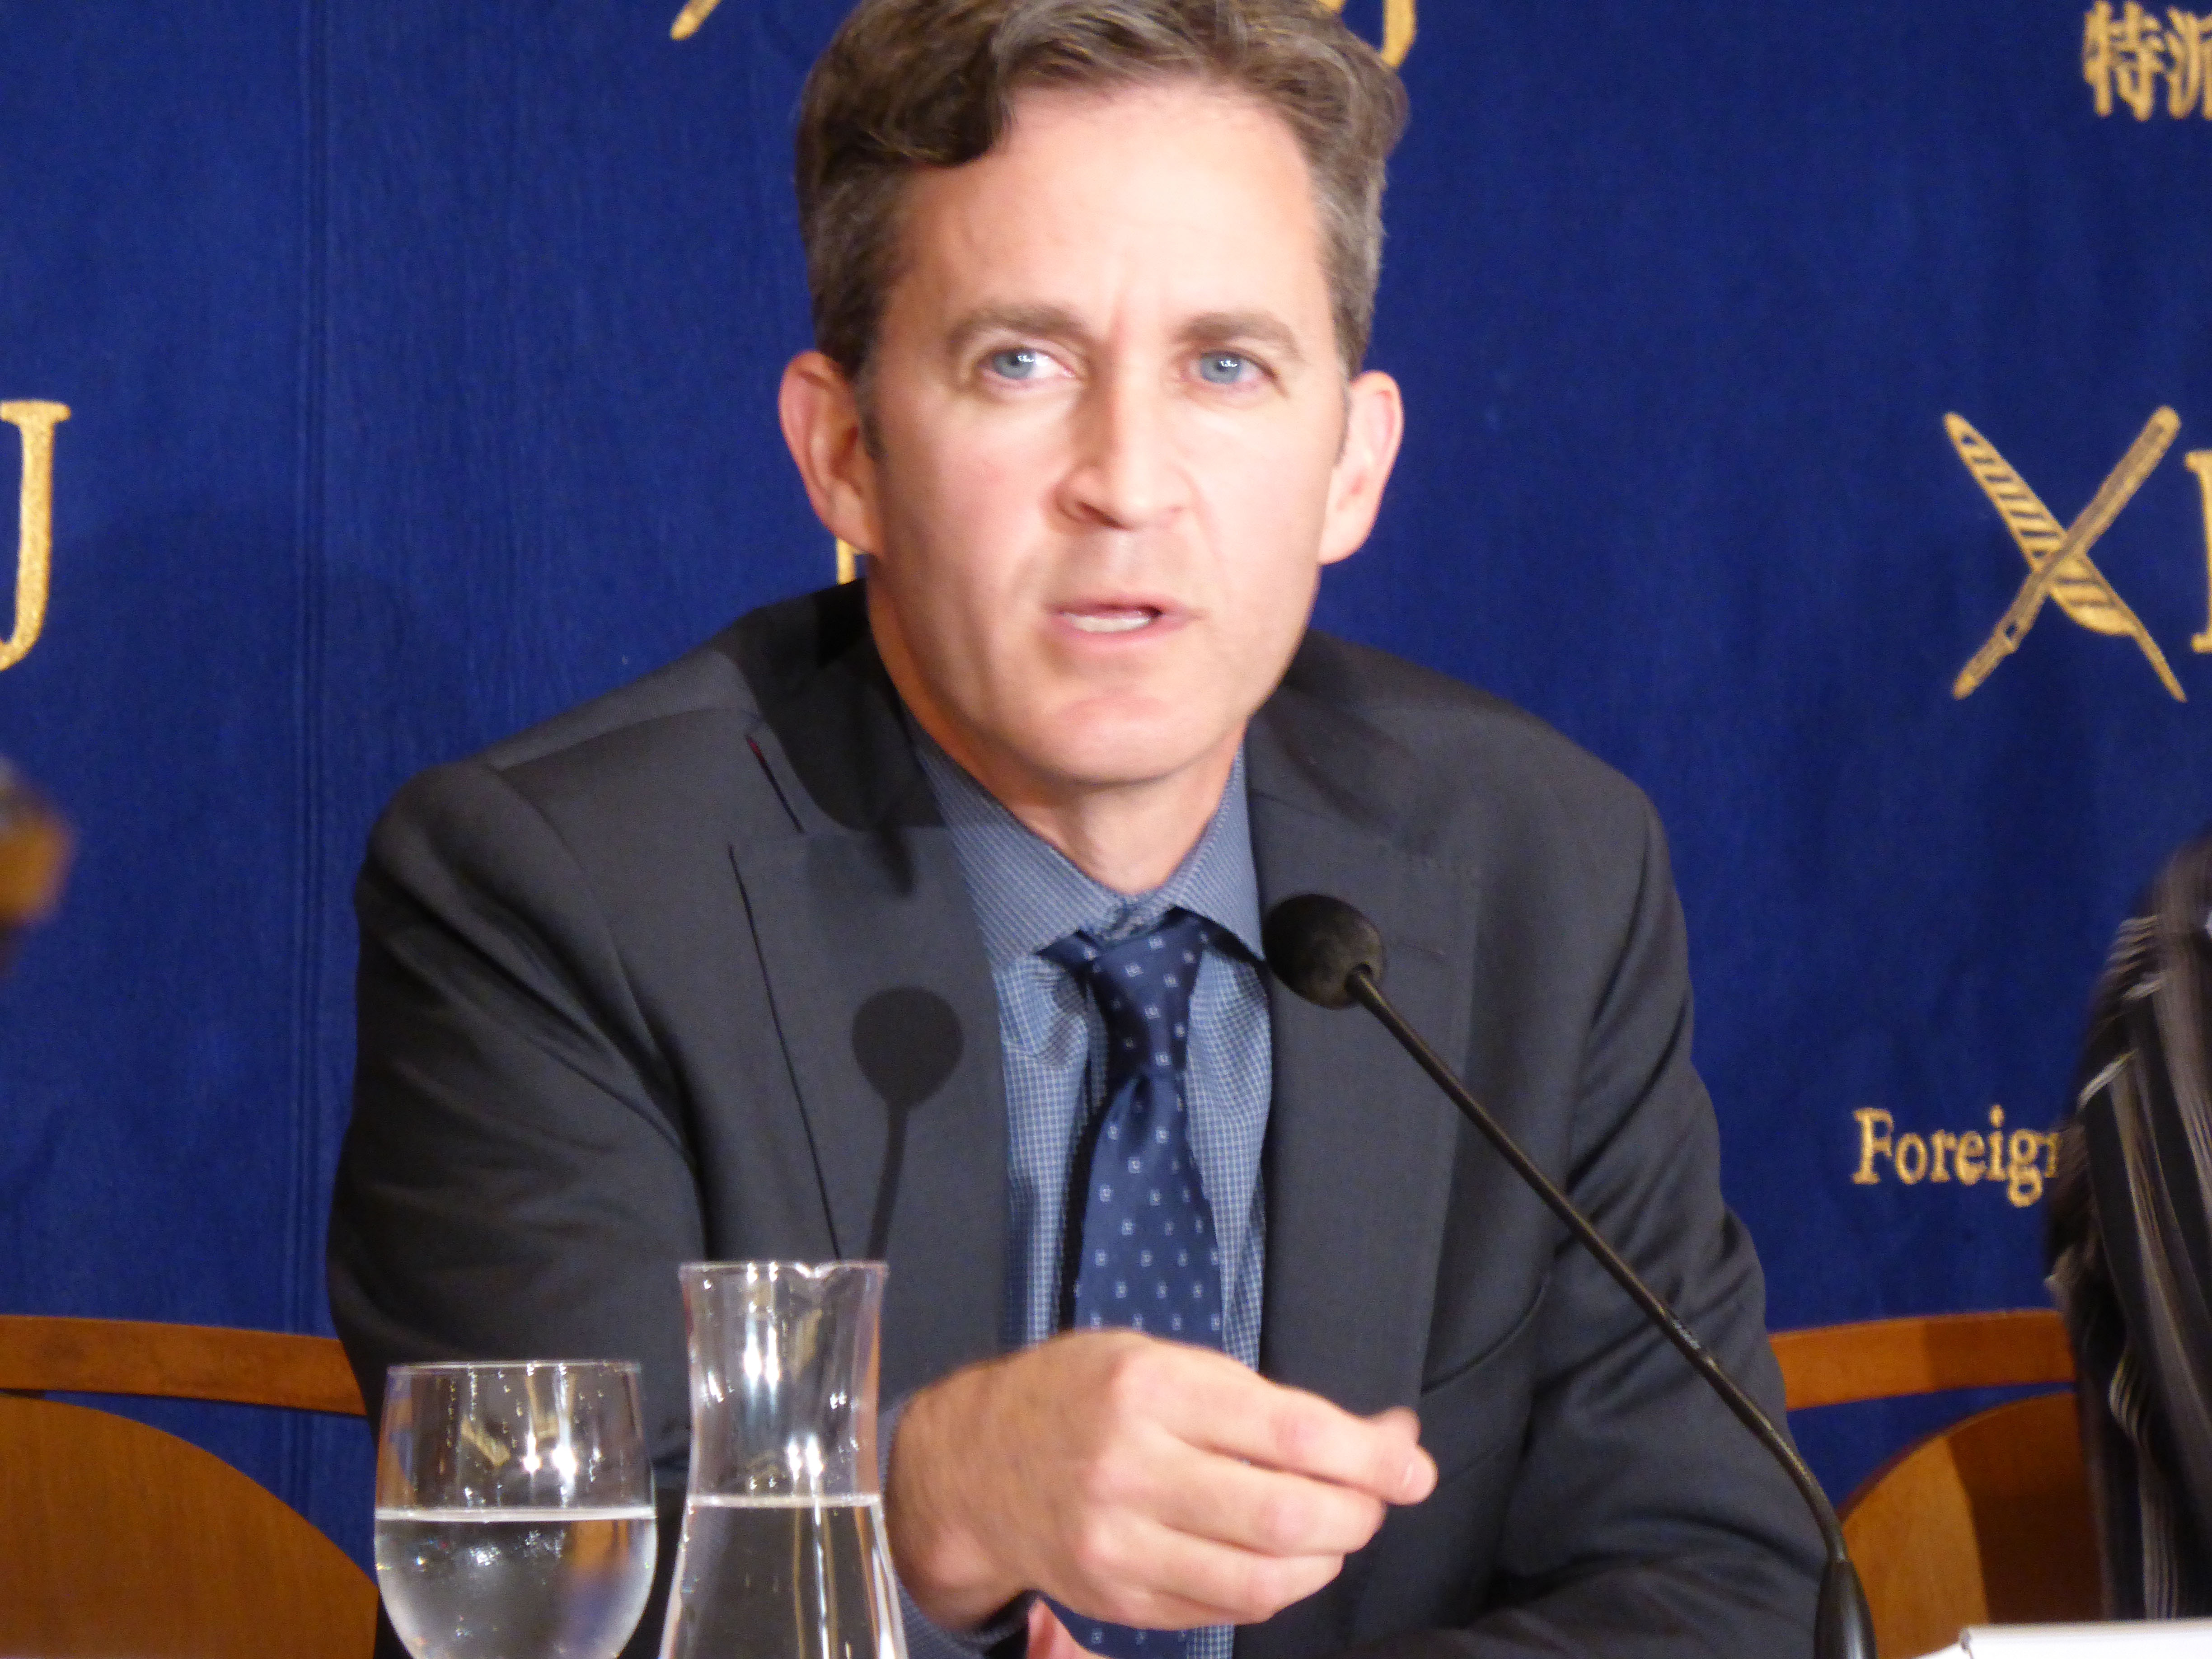 U.N. Special Rapporteur David Kaye speaks at a news conference at the Foreign Correspondents' Club of Japan in Tokyo on Tuesday. | SHUSUKE MURAI